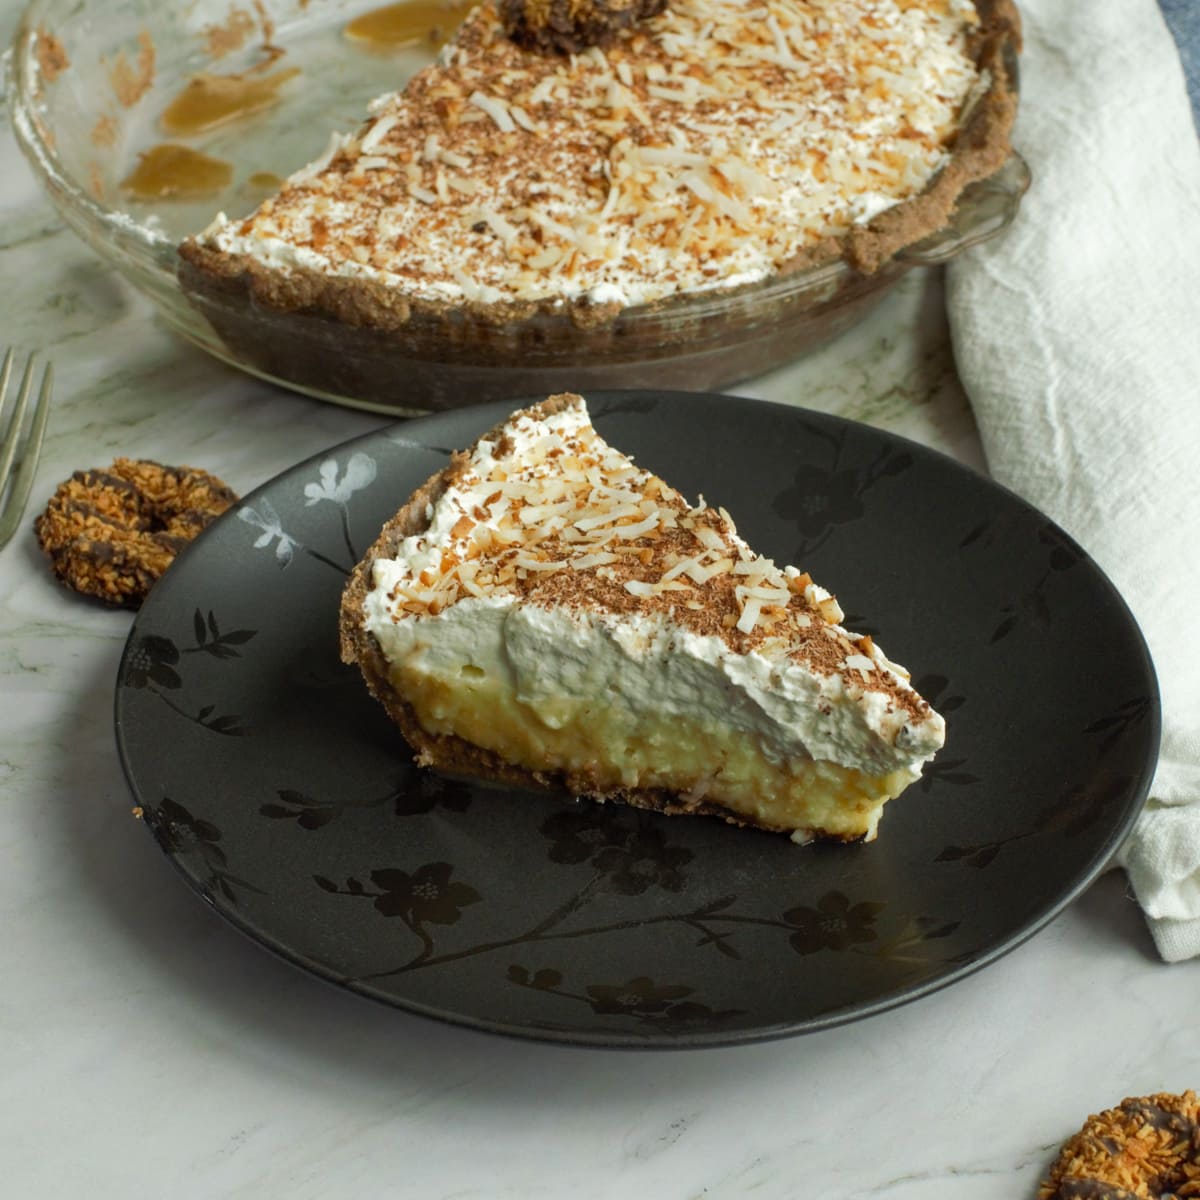 Rish and creamy slice of coconut cream pie with a cookie crust and caramel.